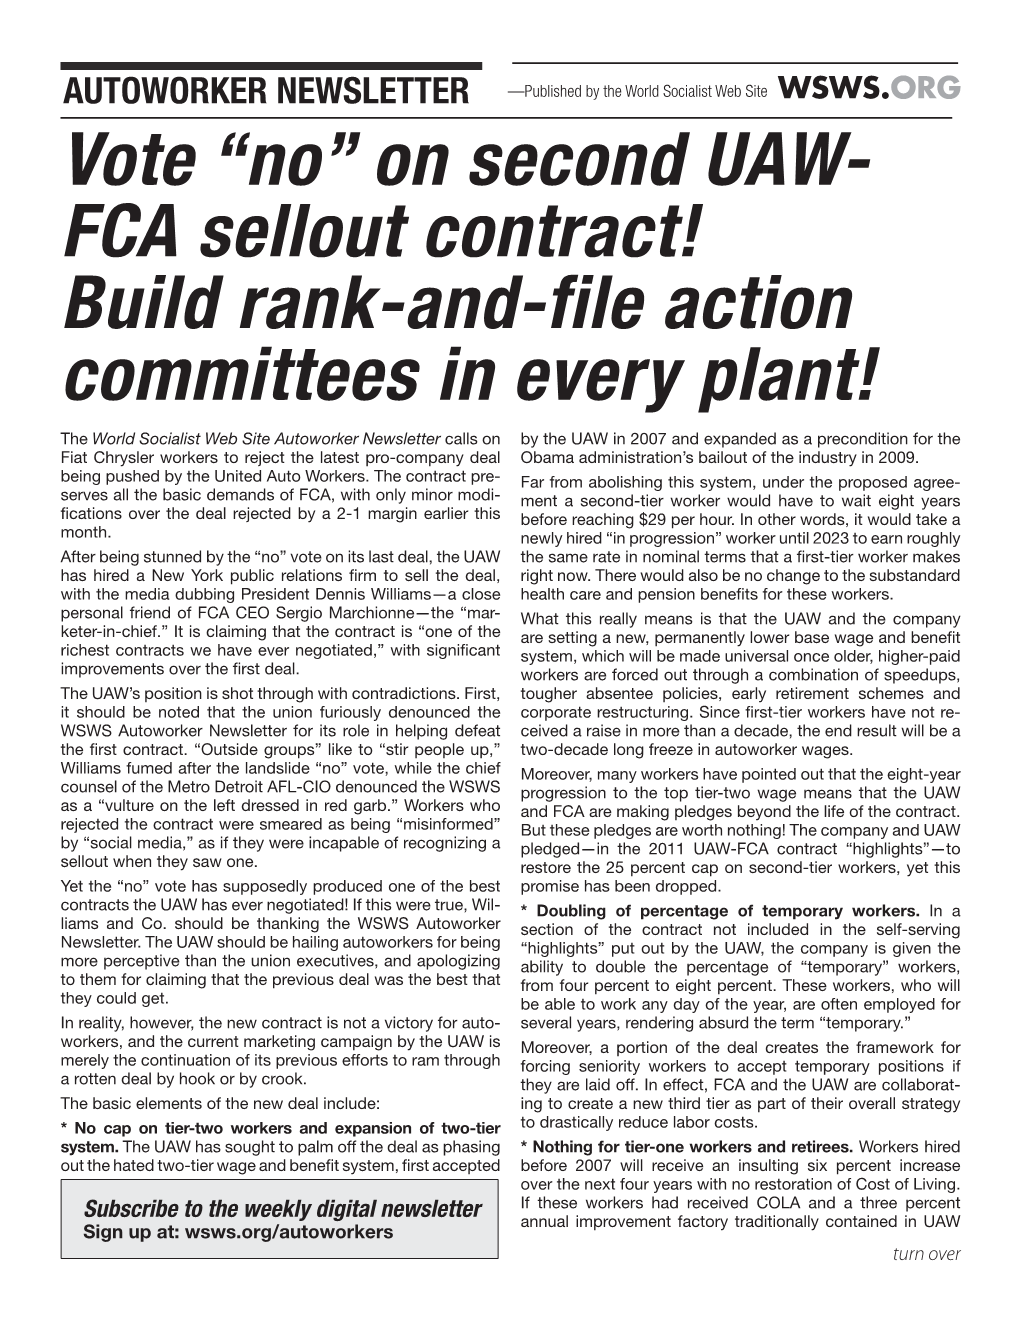 FCA Sellout Contract!